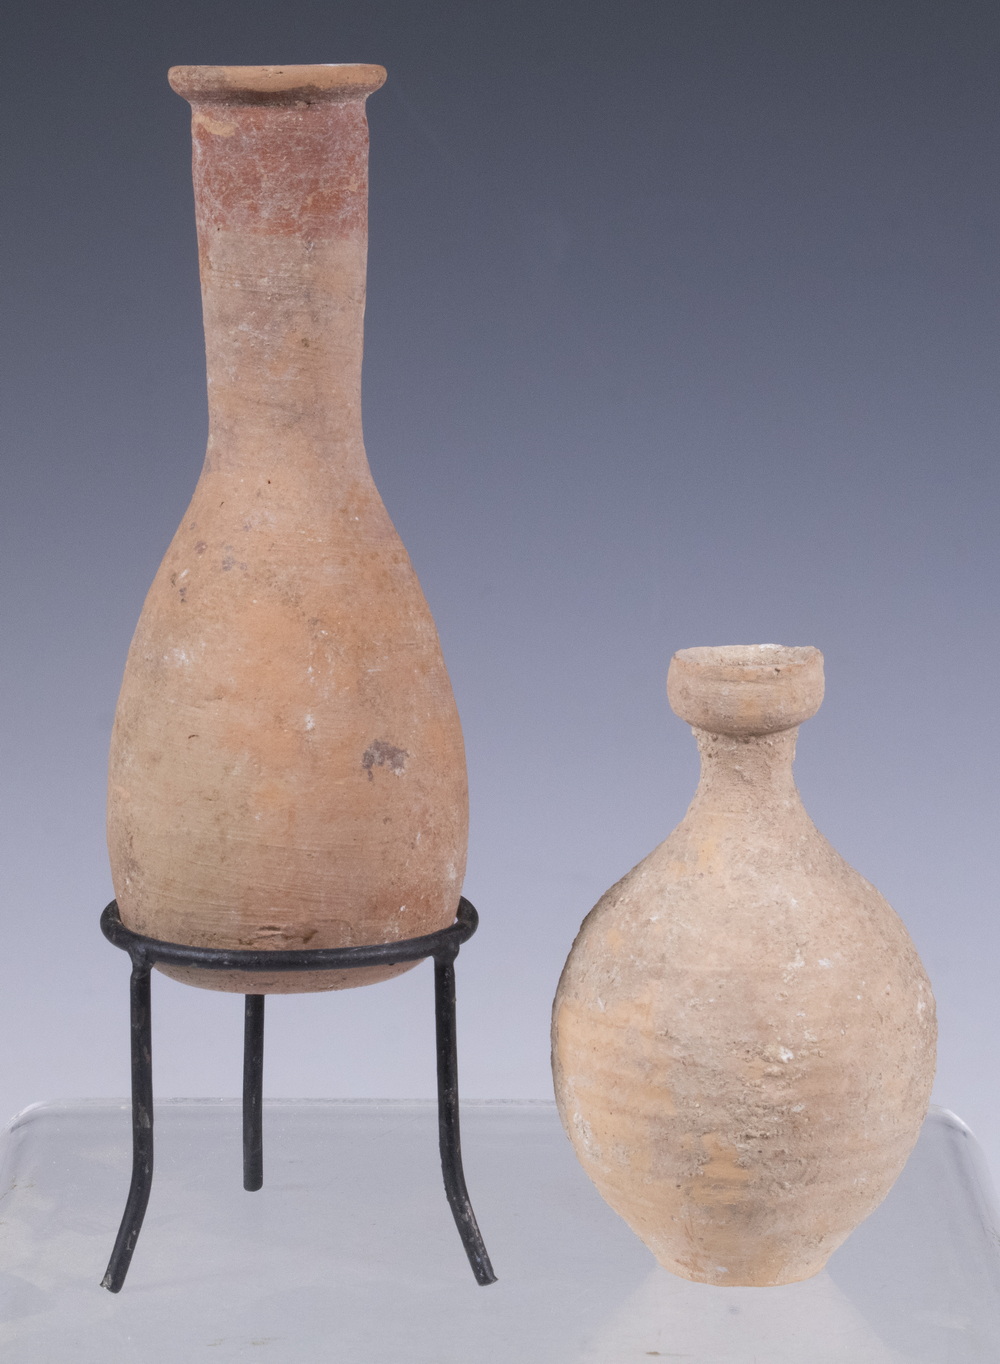  2 SMALL TERRACOTTA POURING VESSELS  30c7fb